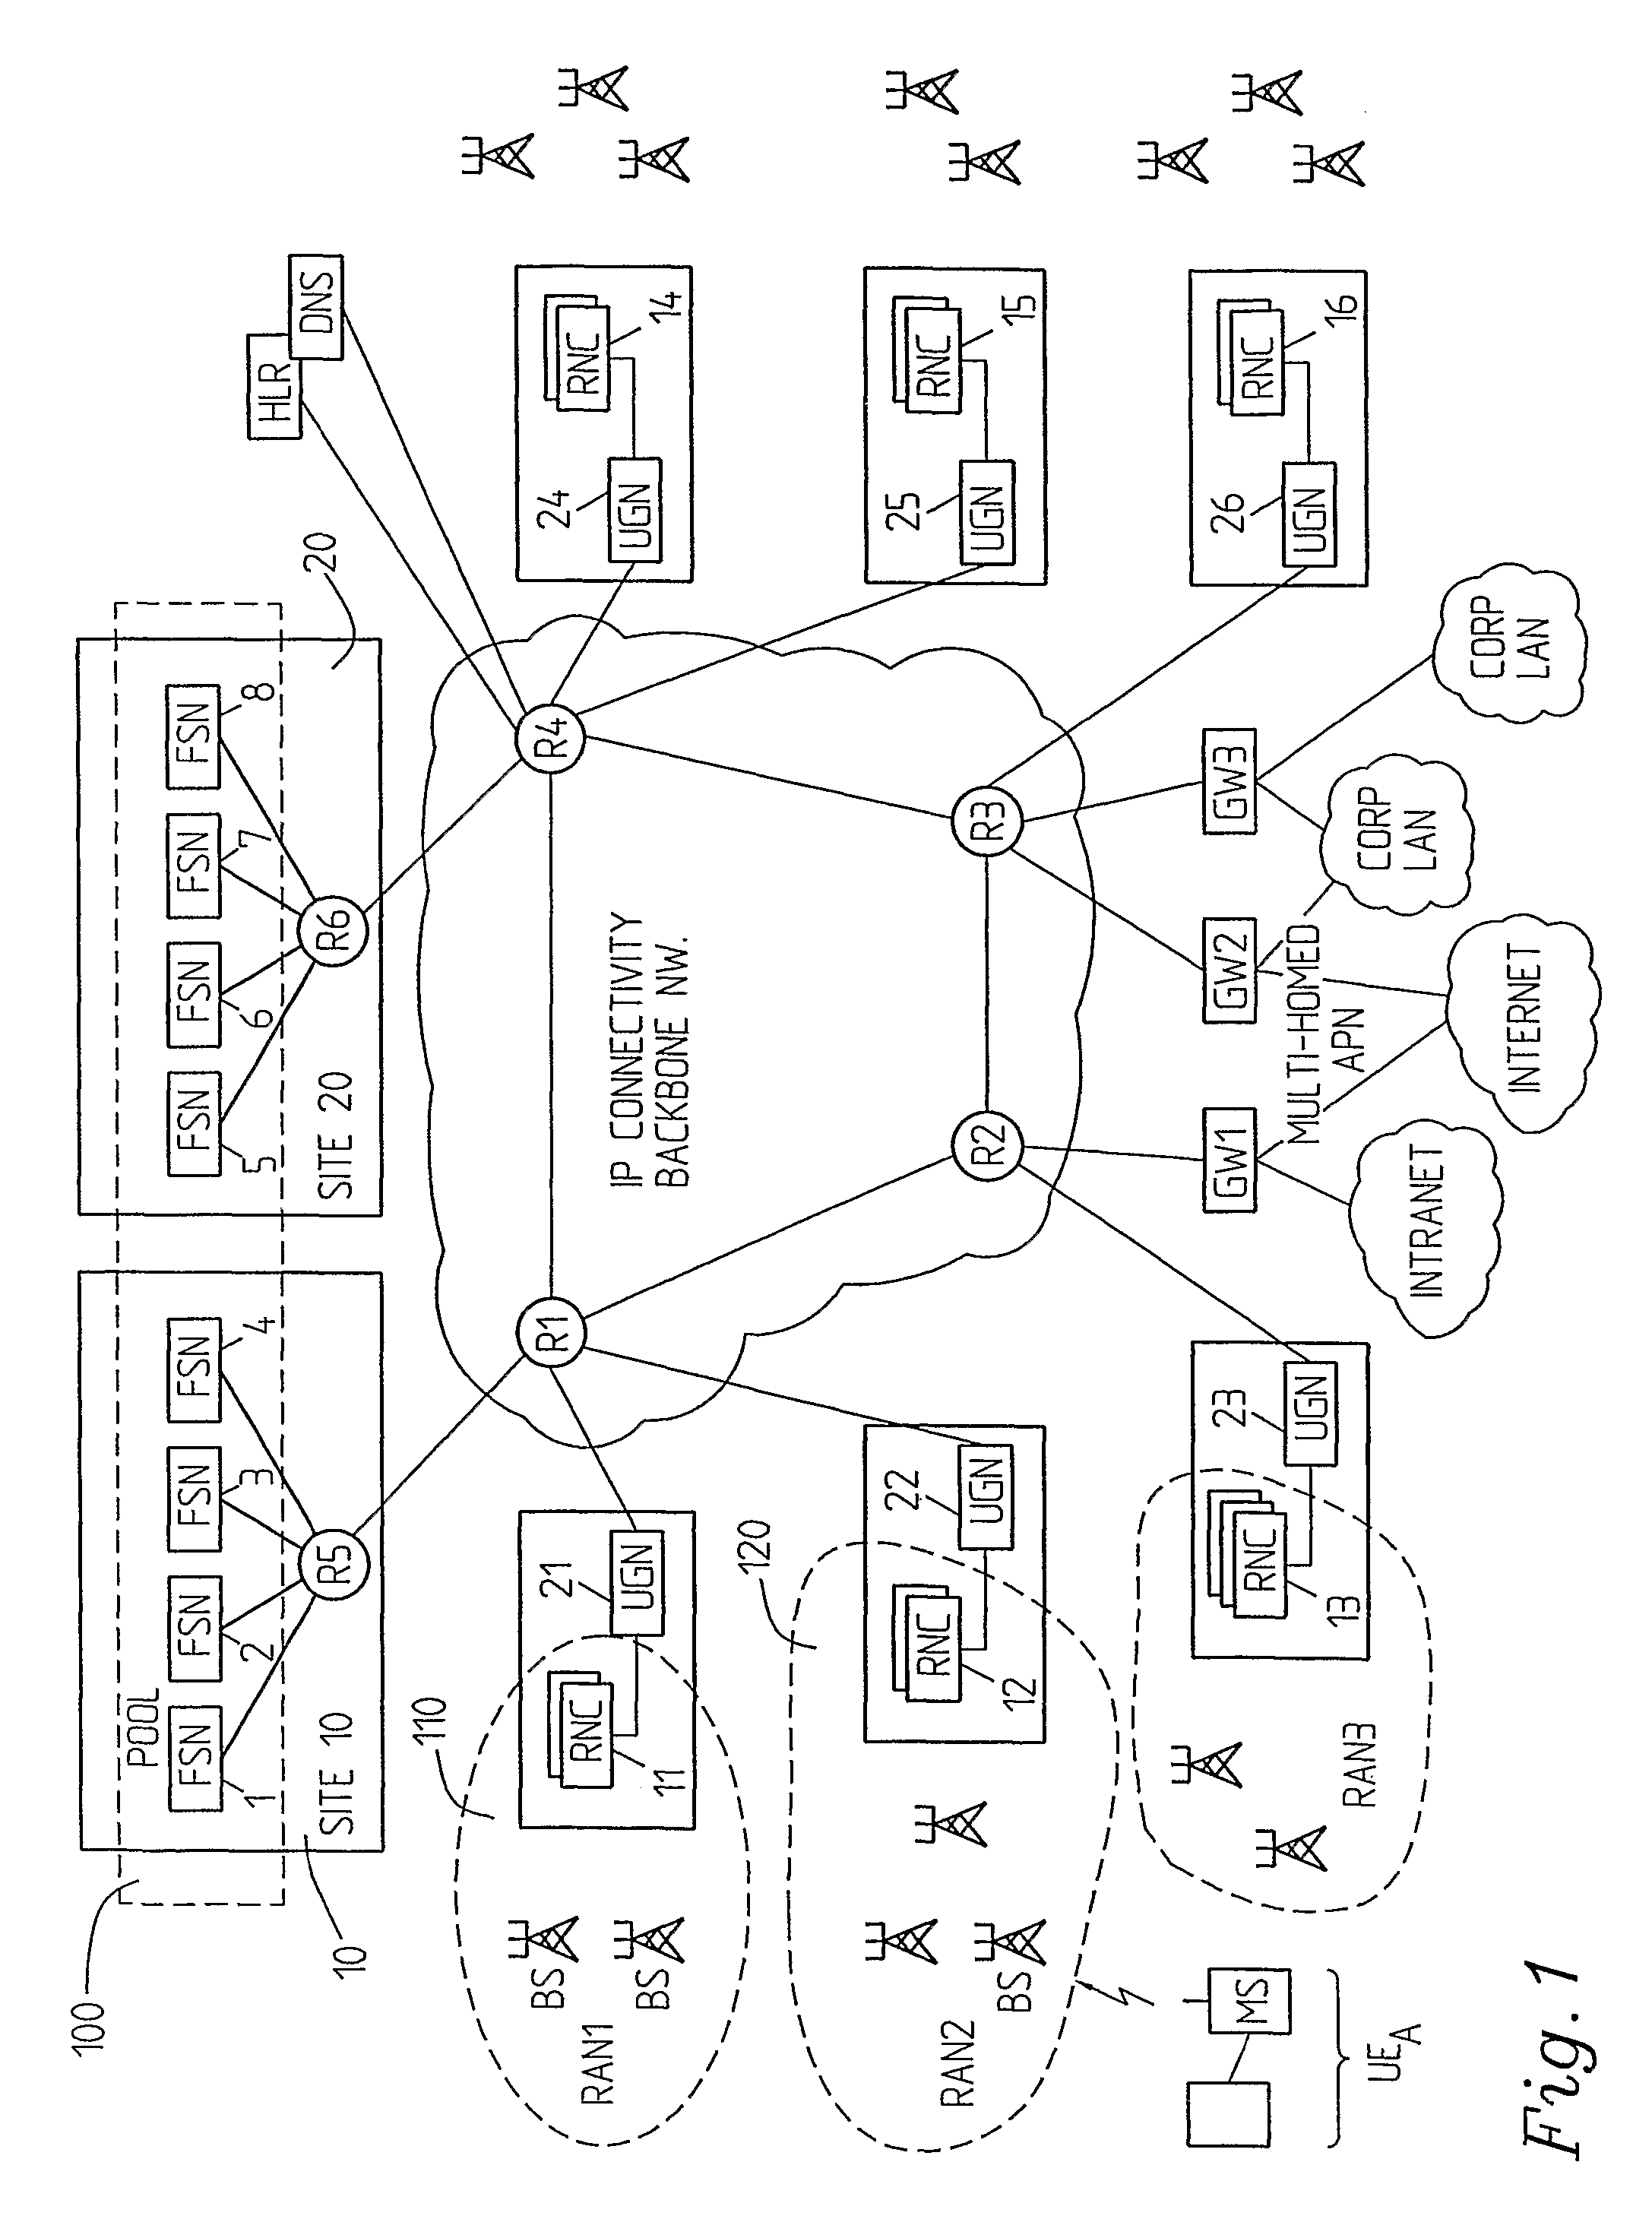 Arrangement and a method in communication networks